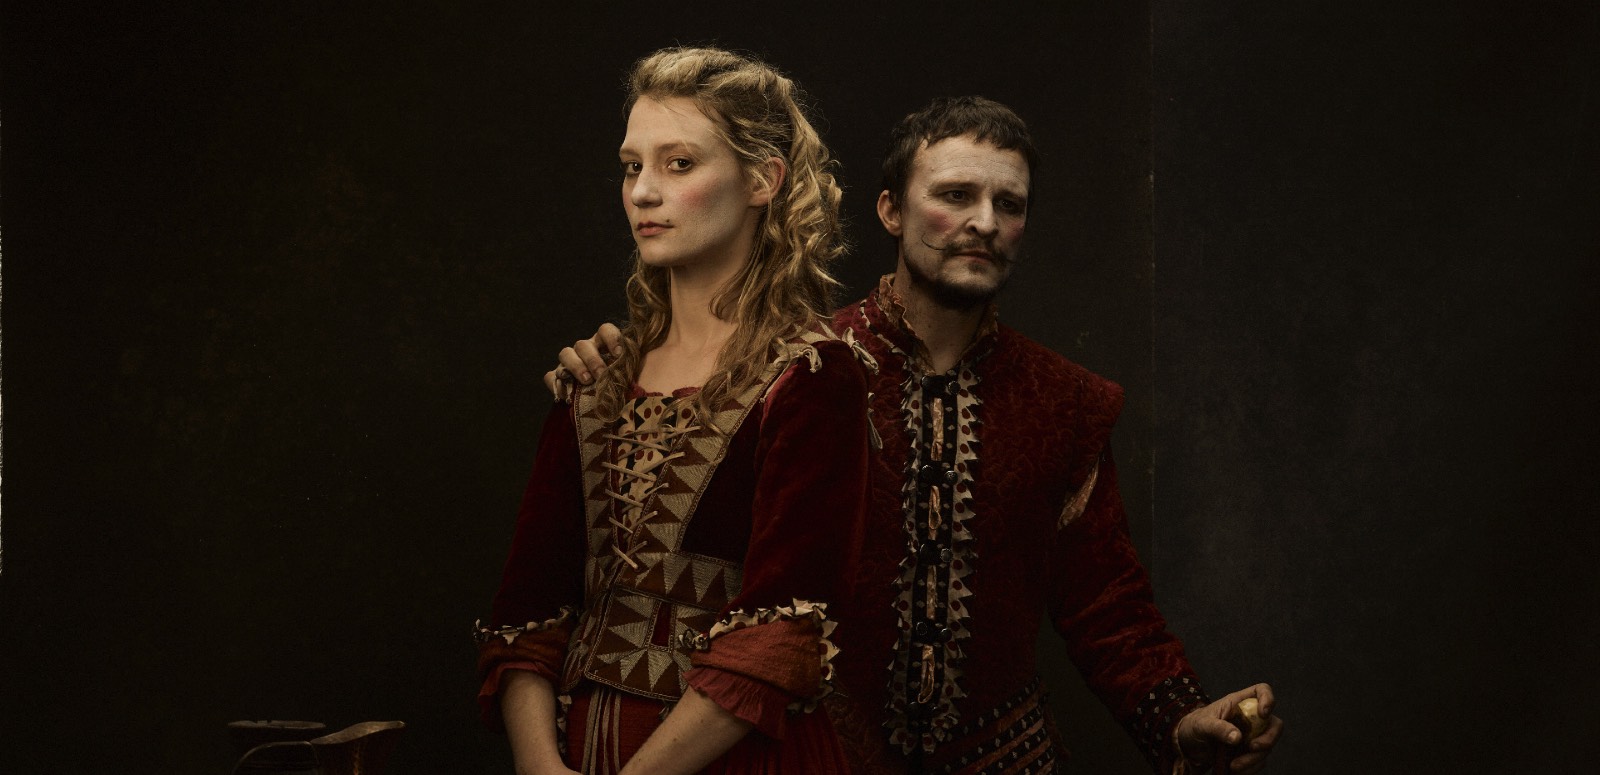 Mia Wasikowska and Damon Herriman standing shoulder to shoulder dressed in 17th century costume in the film Judy & Punch